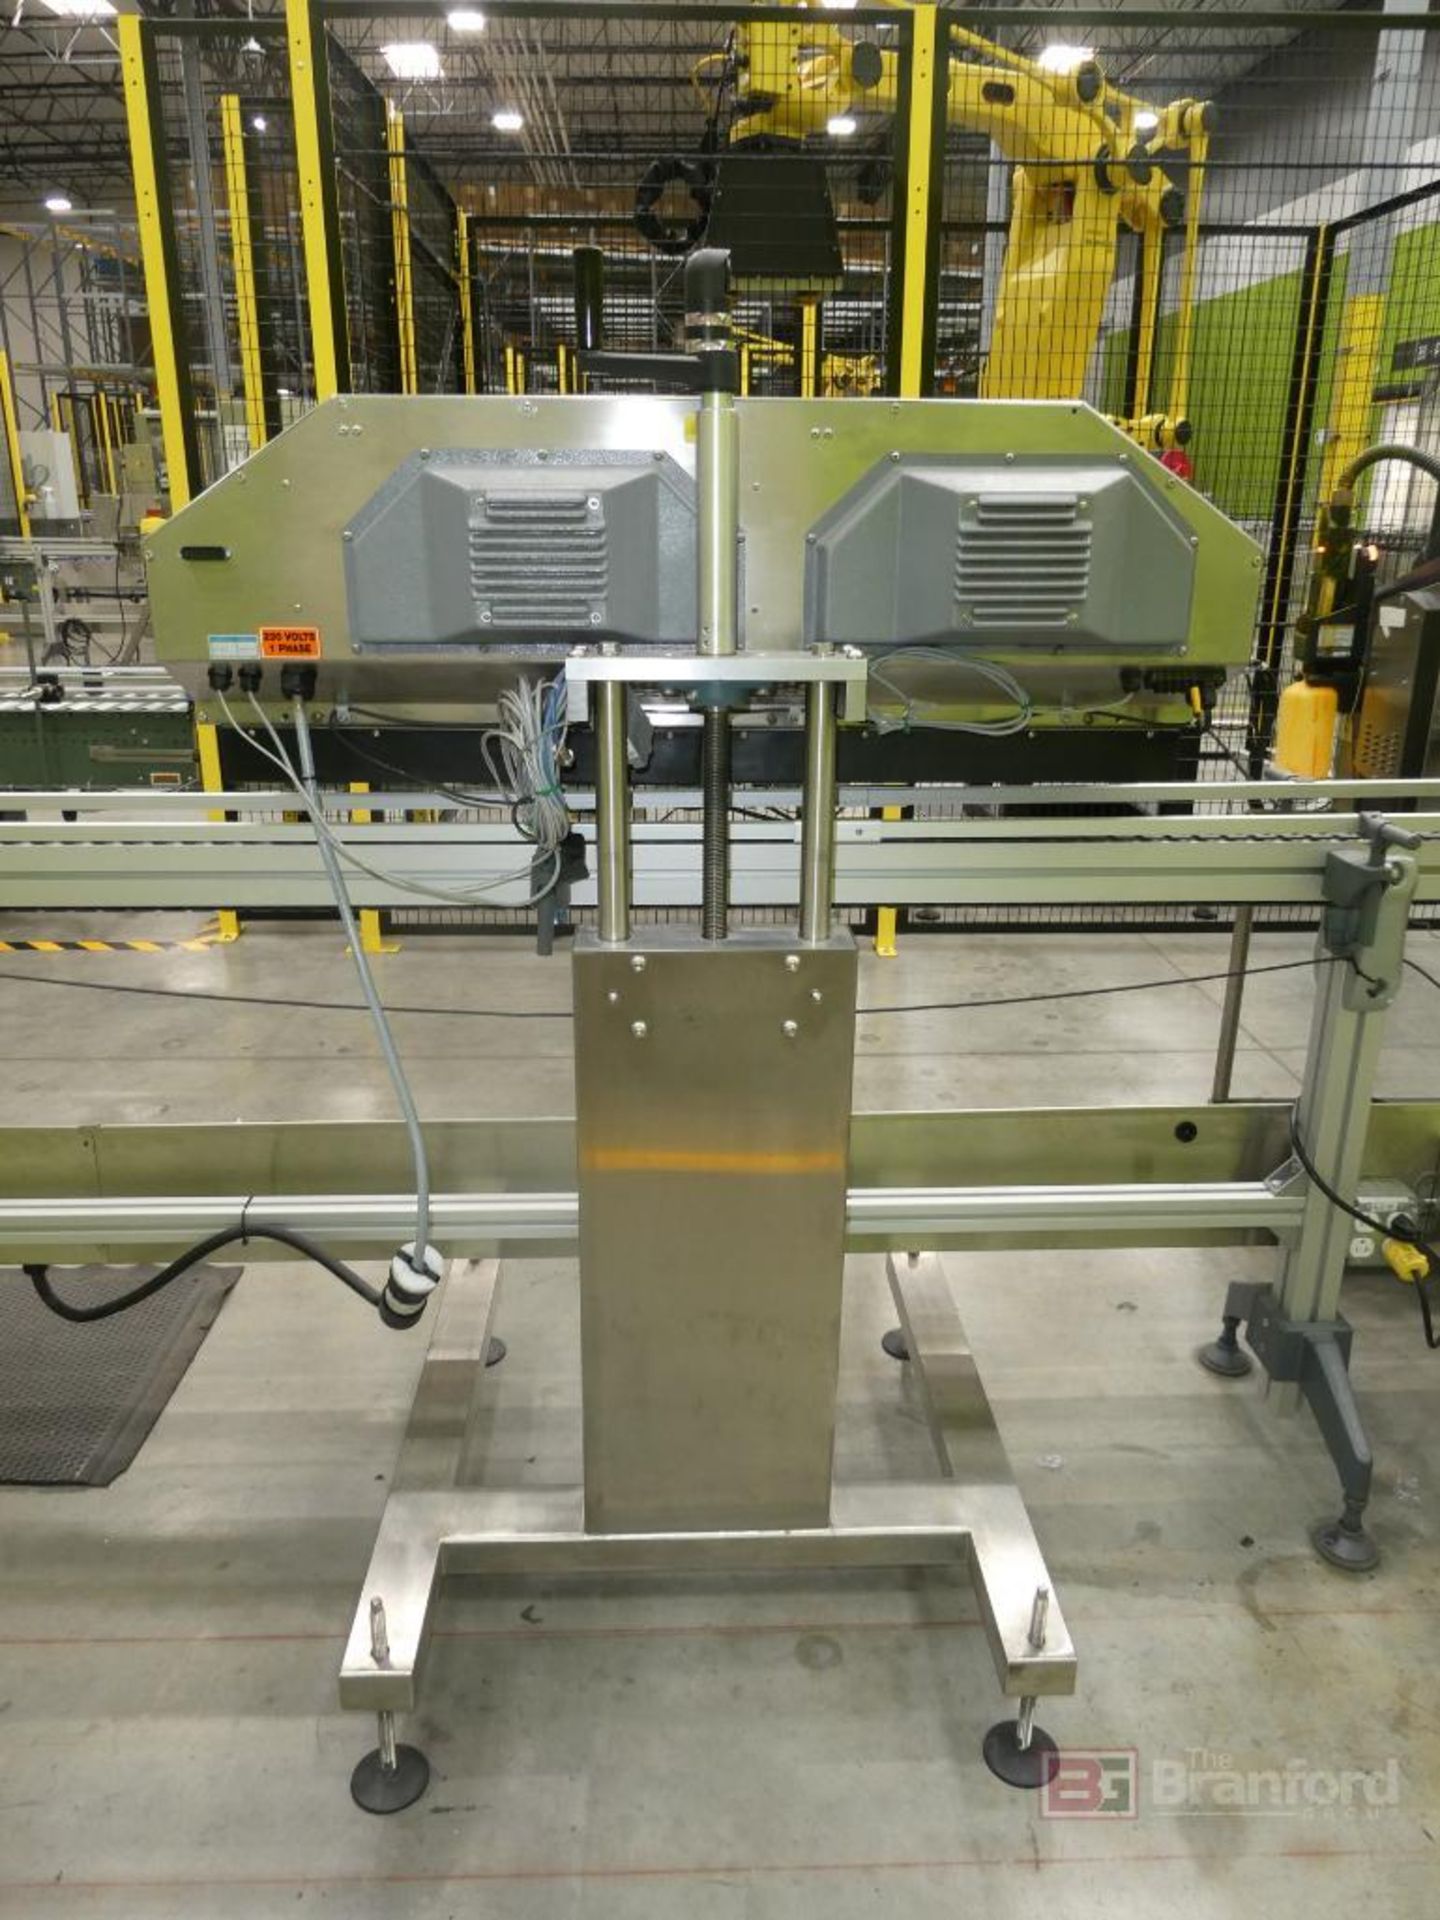 AutoMate Model AM-500, Stainless Steel High Speed Induction Sealer - Image 4 of 4